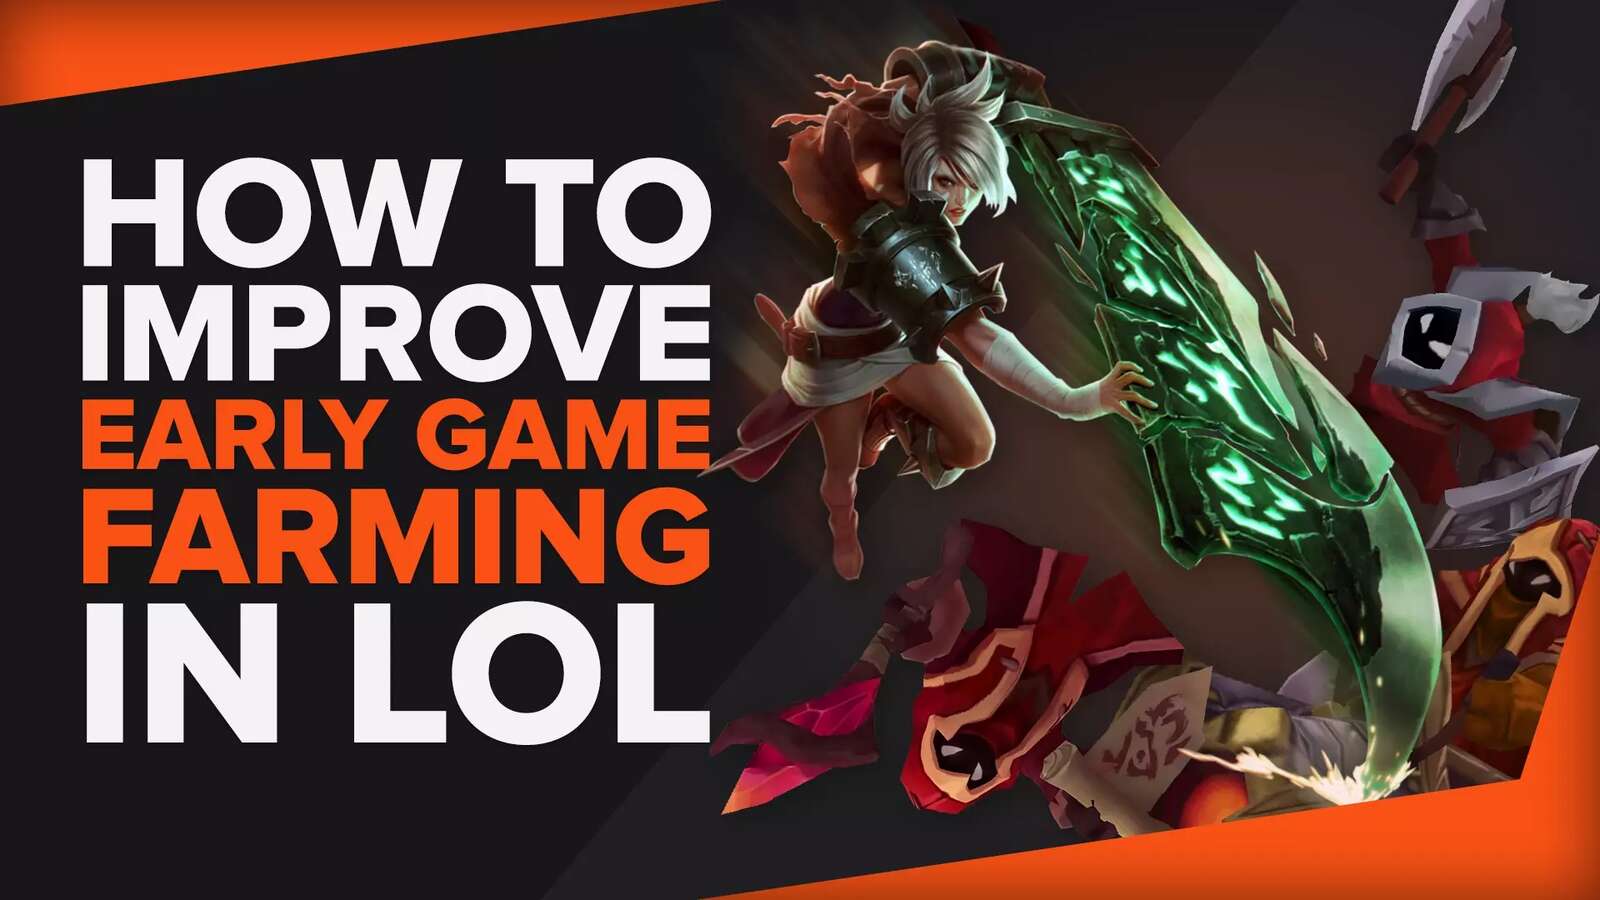 Top 4 Ways to Improve Early Game Farming to Win Lane in LoL